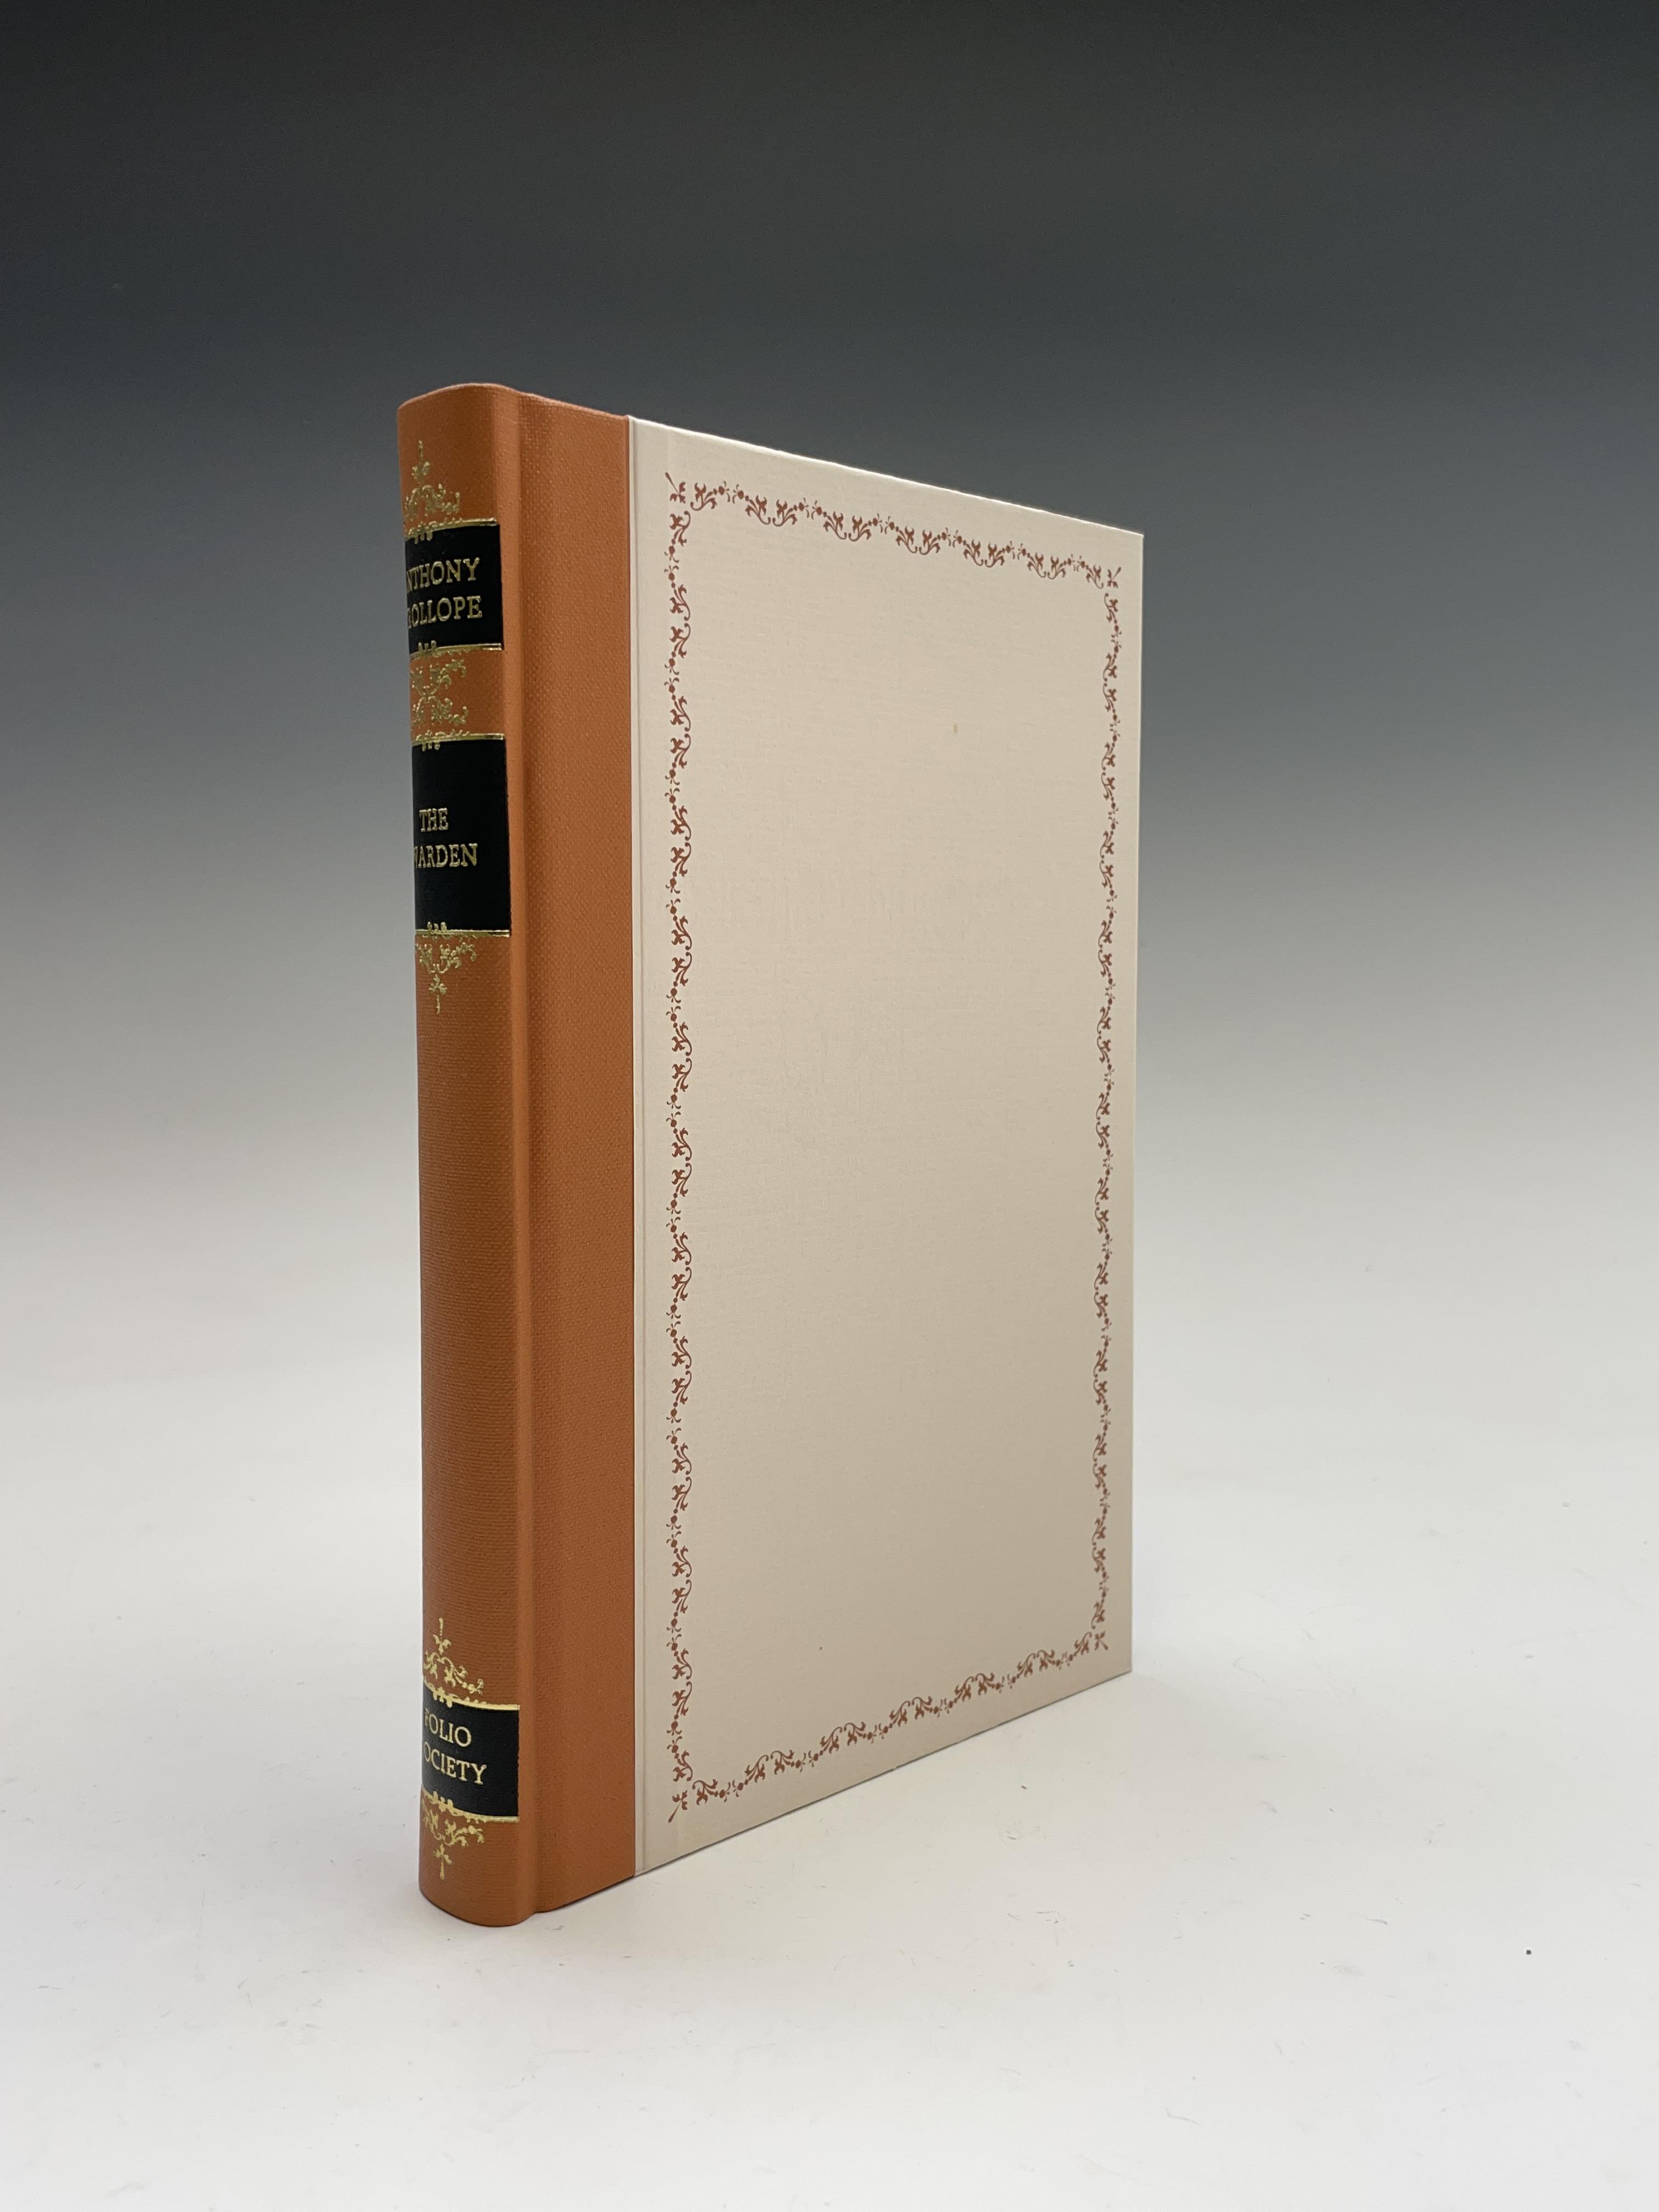 FOLIO SOCIETY - ANTHONY TROLLOPE, Forty Seven titles, vg. Condition: please request a condition - Image 5 of 10